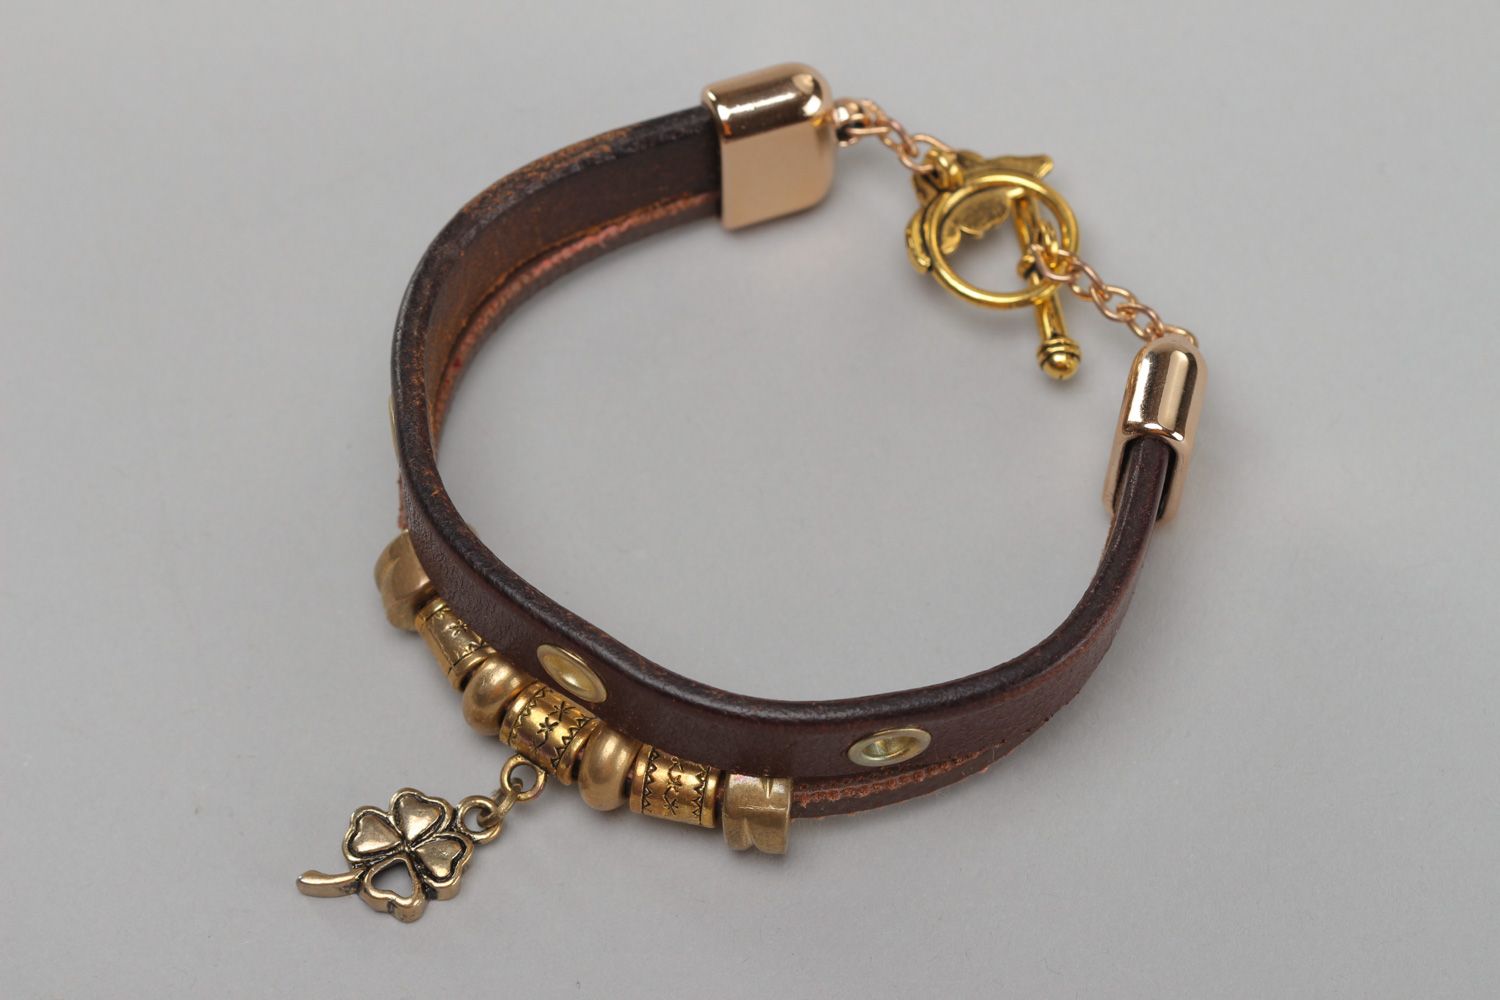 Handmade women's genuine leather bracelet with metal charm in the shape of clover photo 2